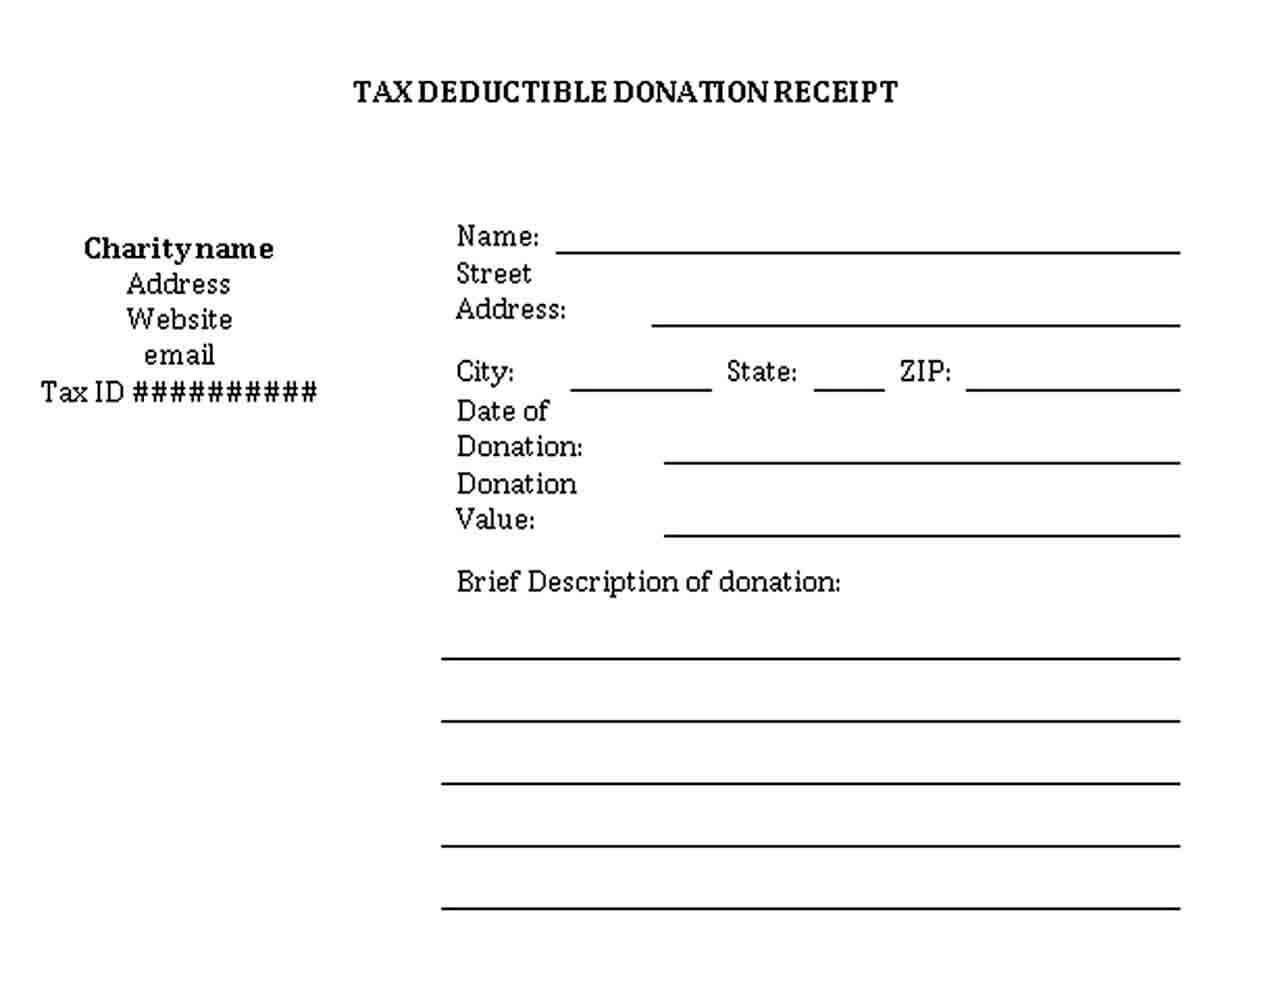 Tax Deductable Receipt Doc Free Download